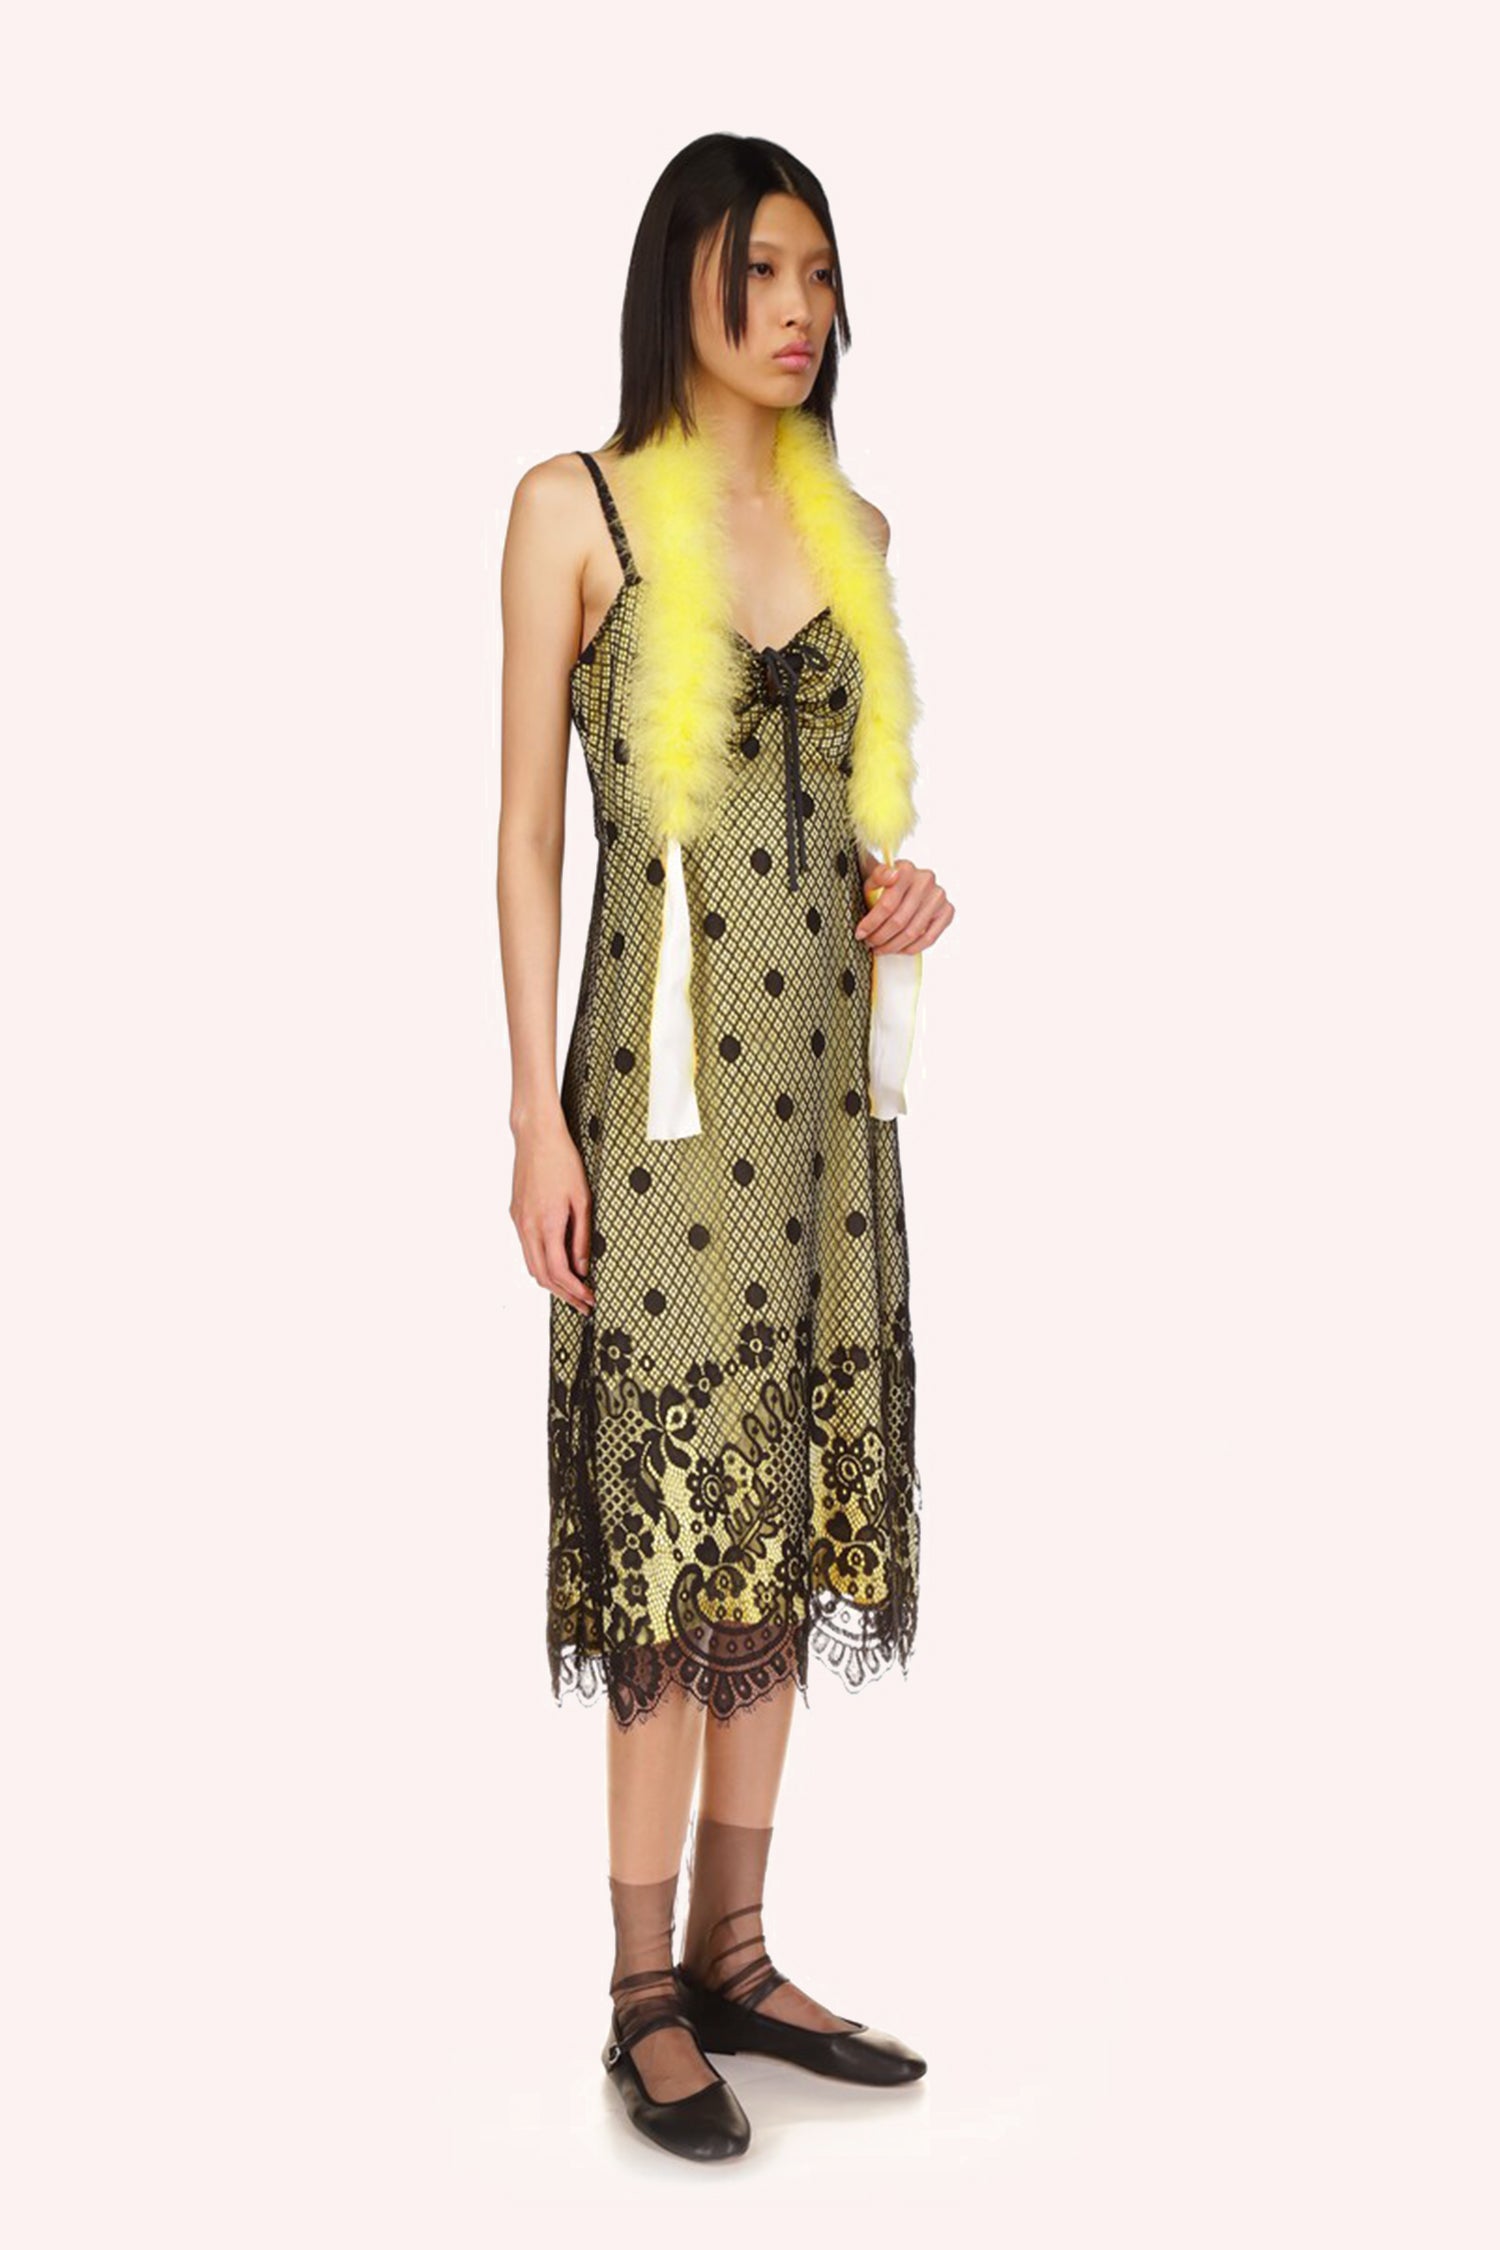 Washed Satin with Lace Dress Canary Yellow/ Black, lace at bottom is in a curvy line